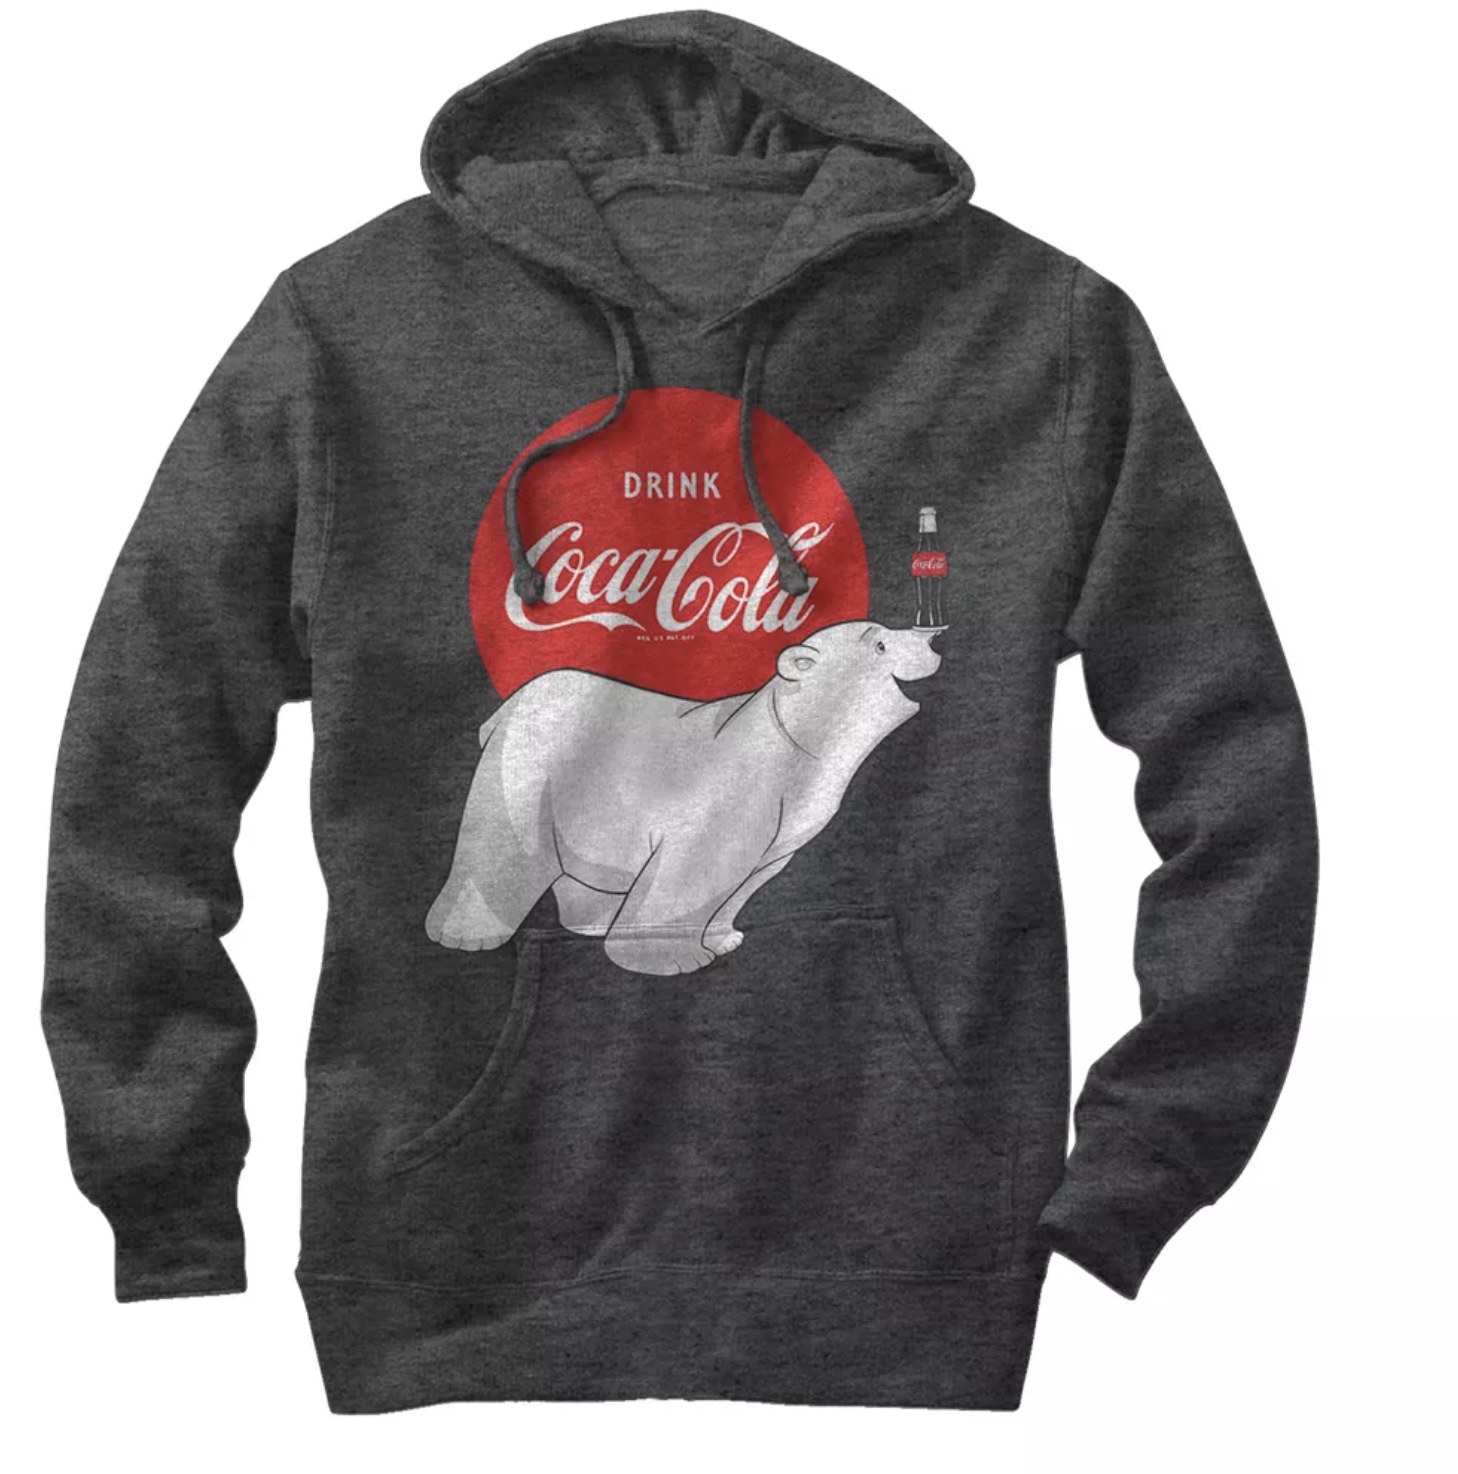 A dark grey pullover hoodie with the coca-cola logo and polar bear on the chest